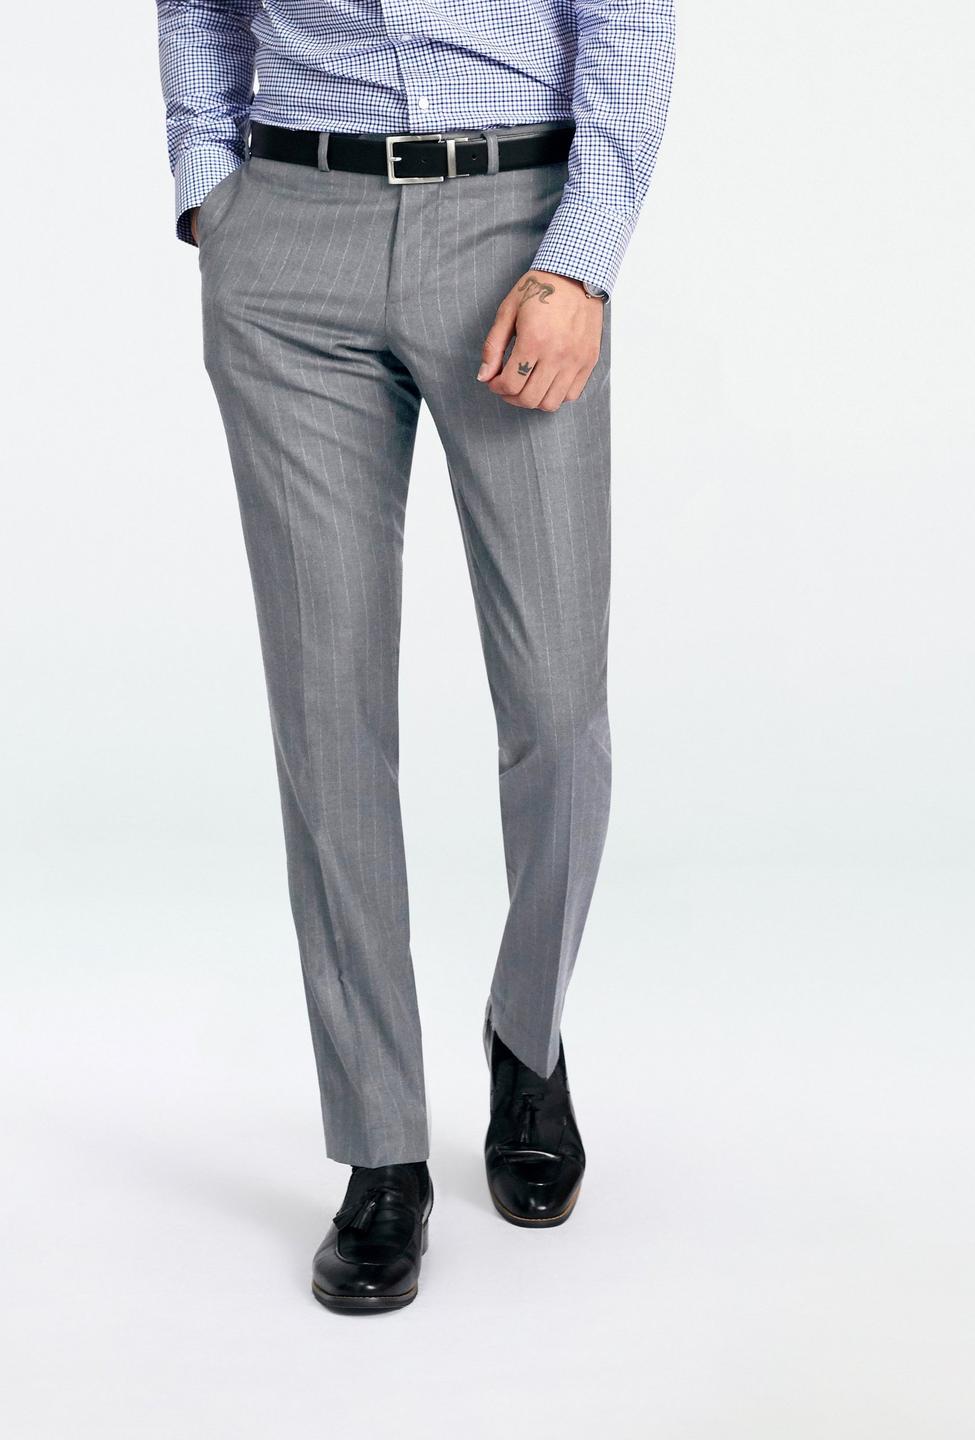 Gray pants - Reigate Striped Design from Seasonal Indochino Collection